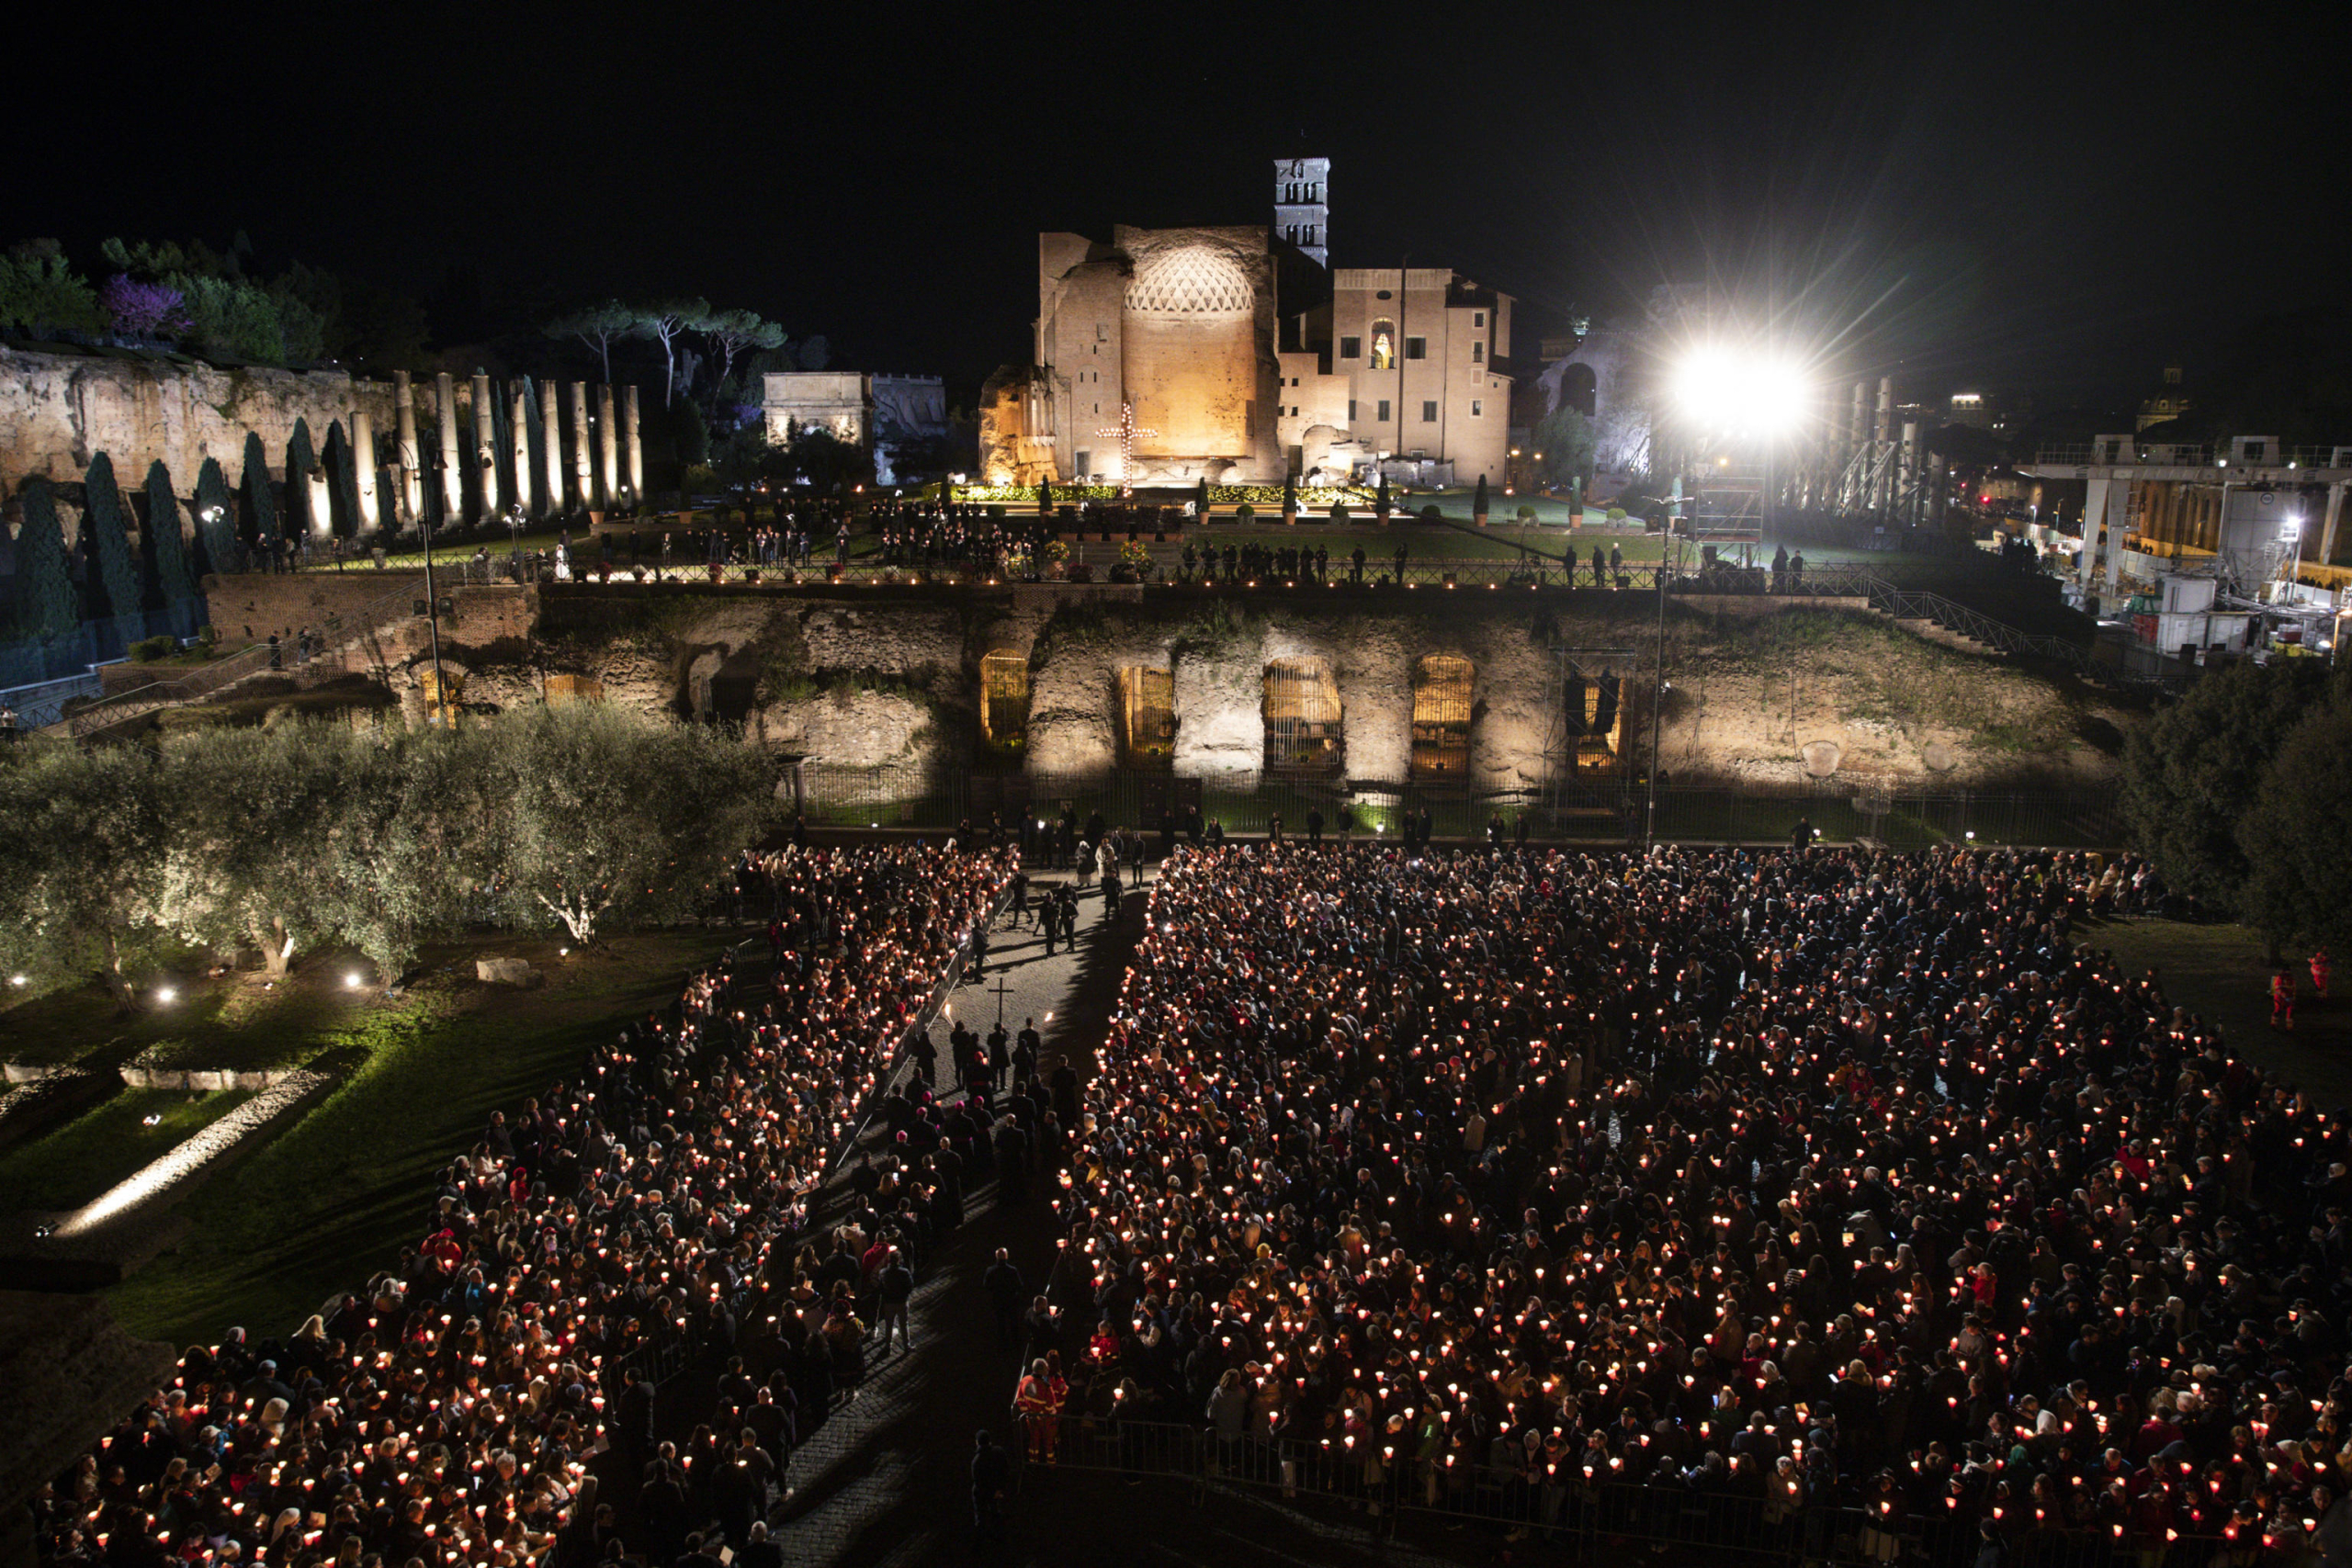 A moment of the Via Crucis - Way of the Cross torchlight procession on Good Friday in front of Colosseum in Rome, Italy, 07 April 2023.. ANSA/ANGELO CARCONI